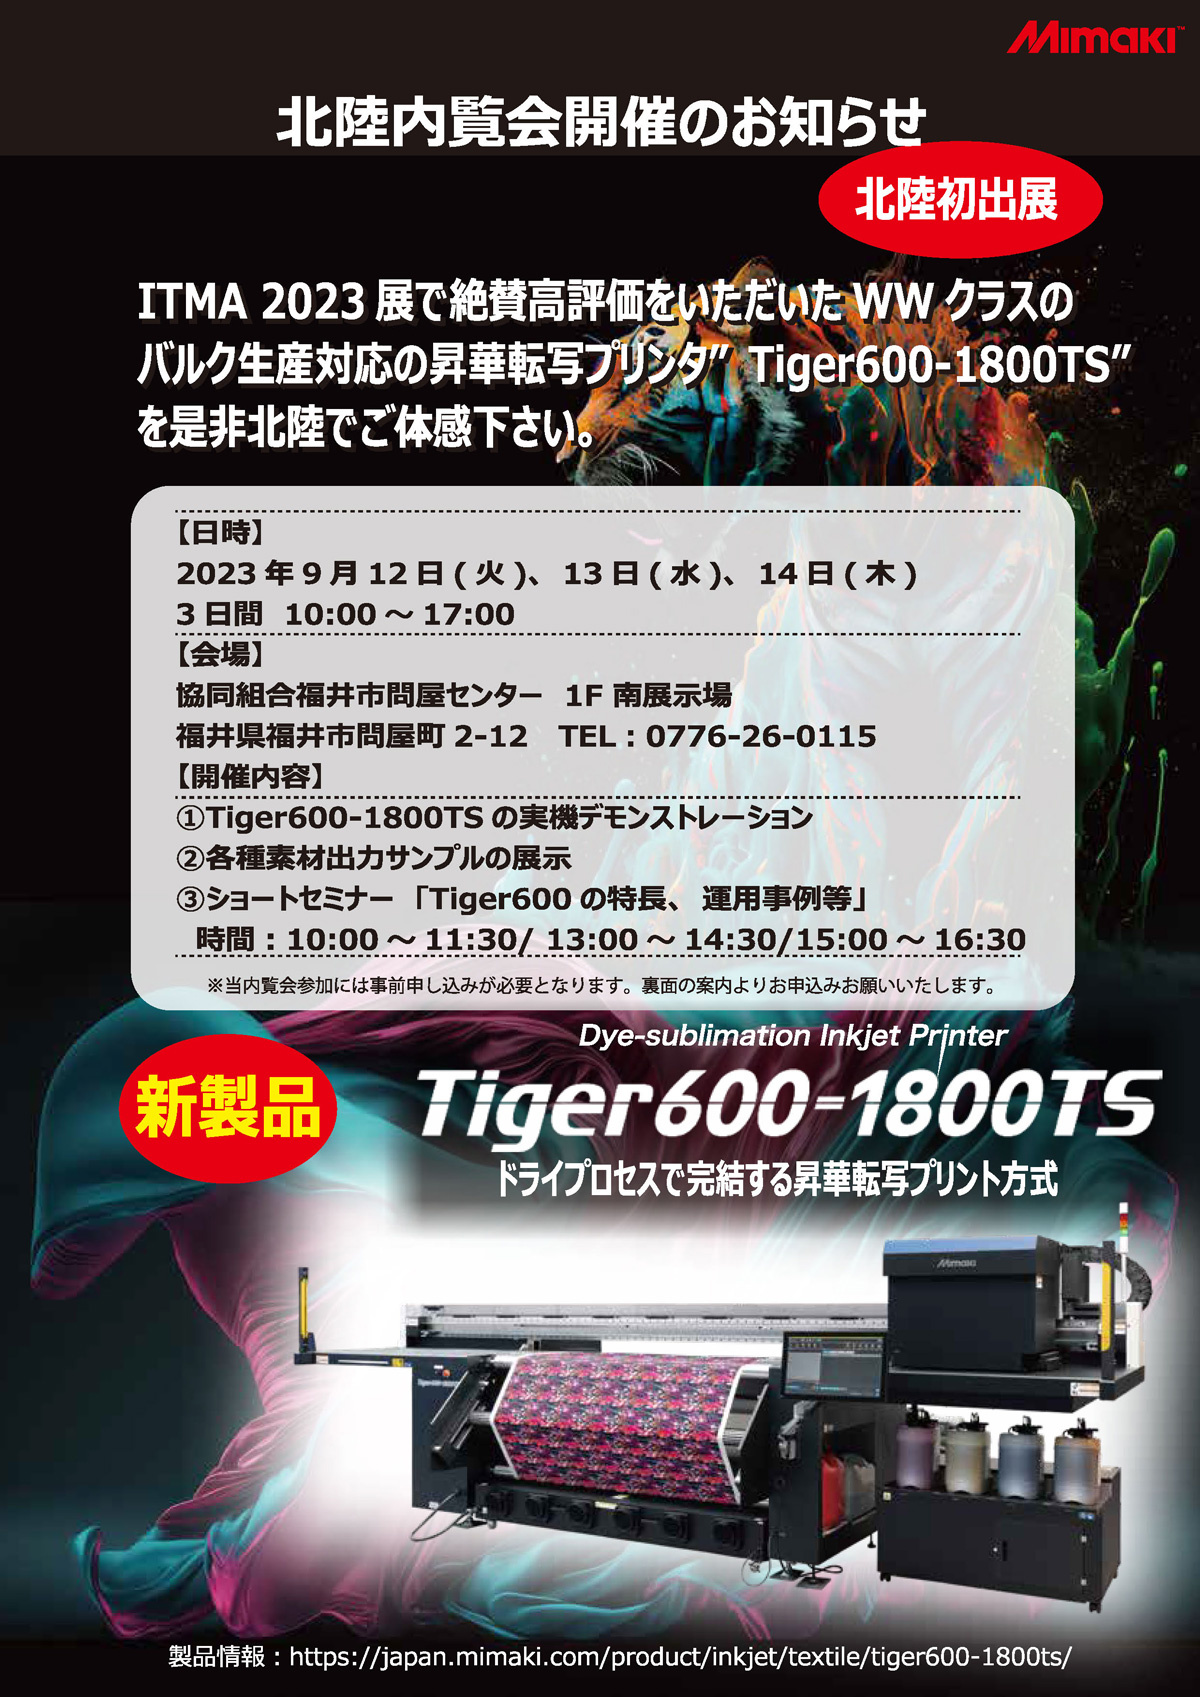 「Tiger600北陸内覧会」開催のご案内（9/12～9/14：福井）